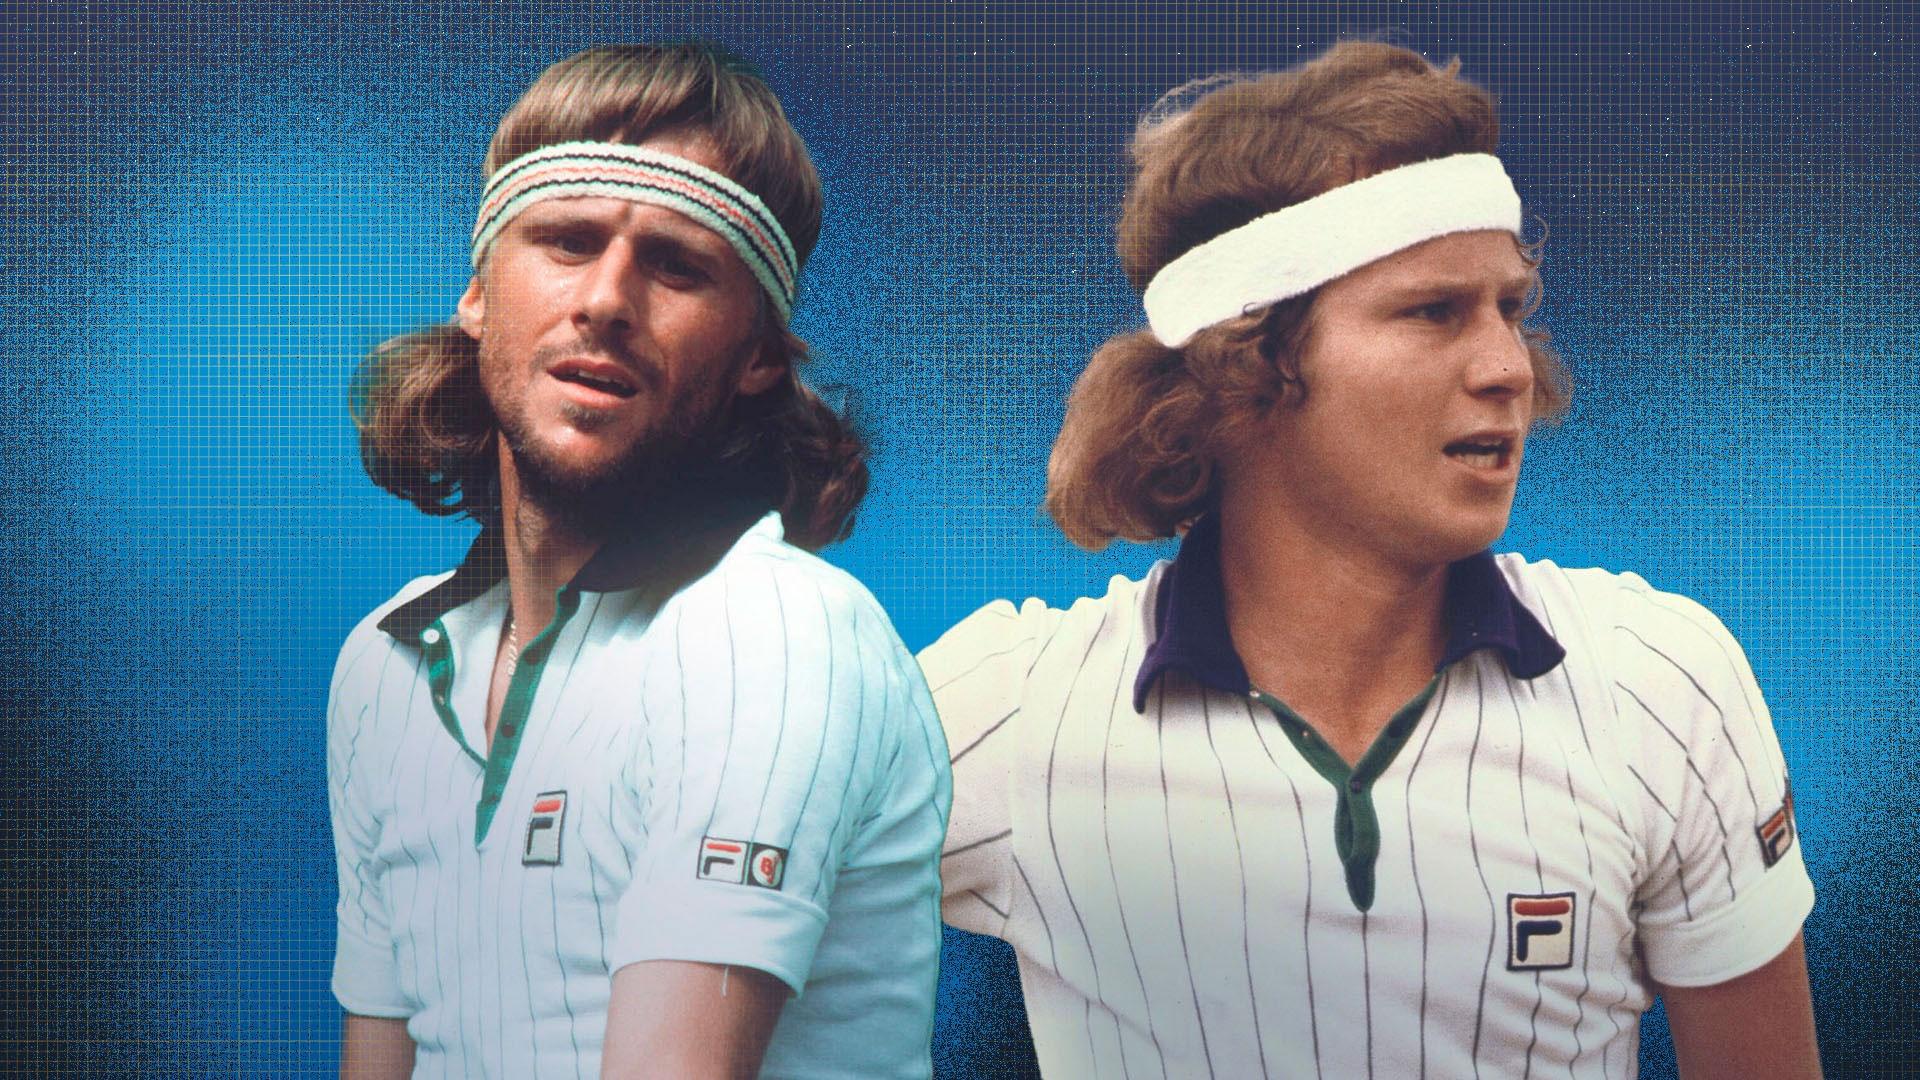 a photo college of Bjorn Borg and John McEnroe from earily in their career